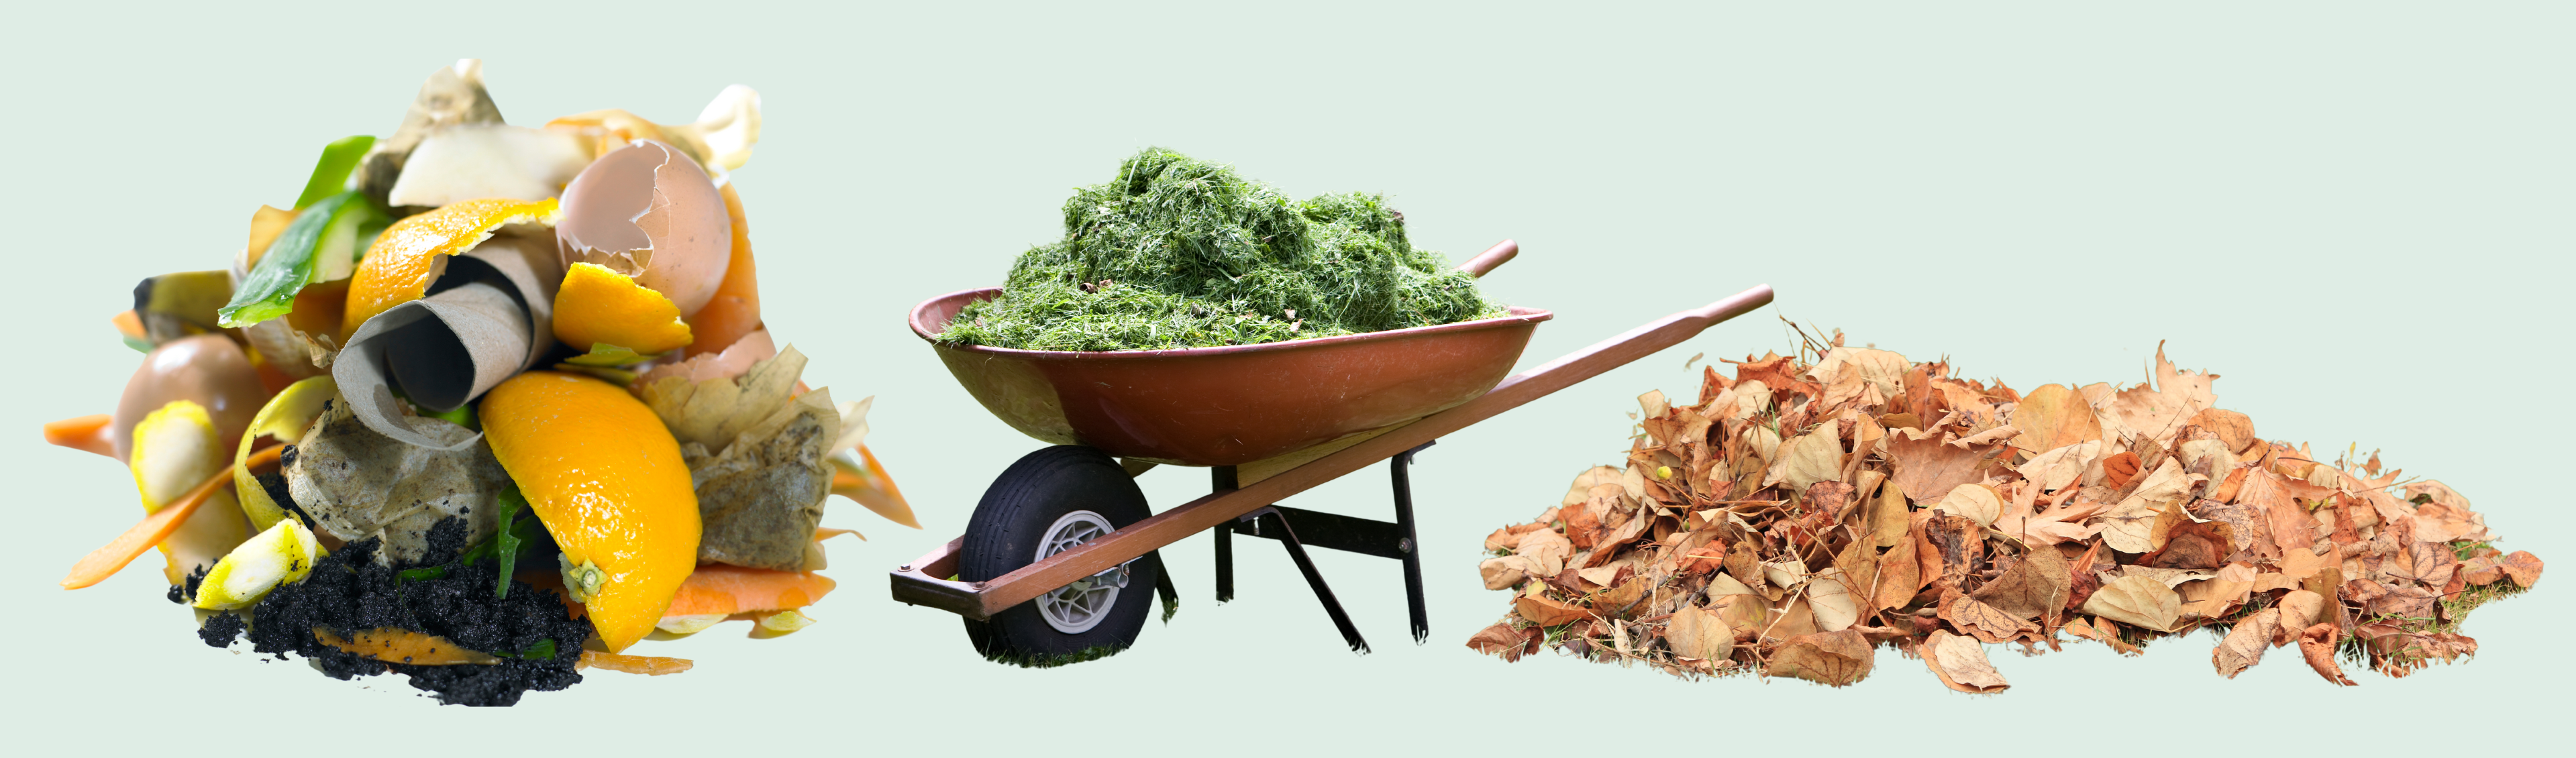 Small pile of food scraps, wheelbarrow full of grass clippings and pile of leaves